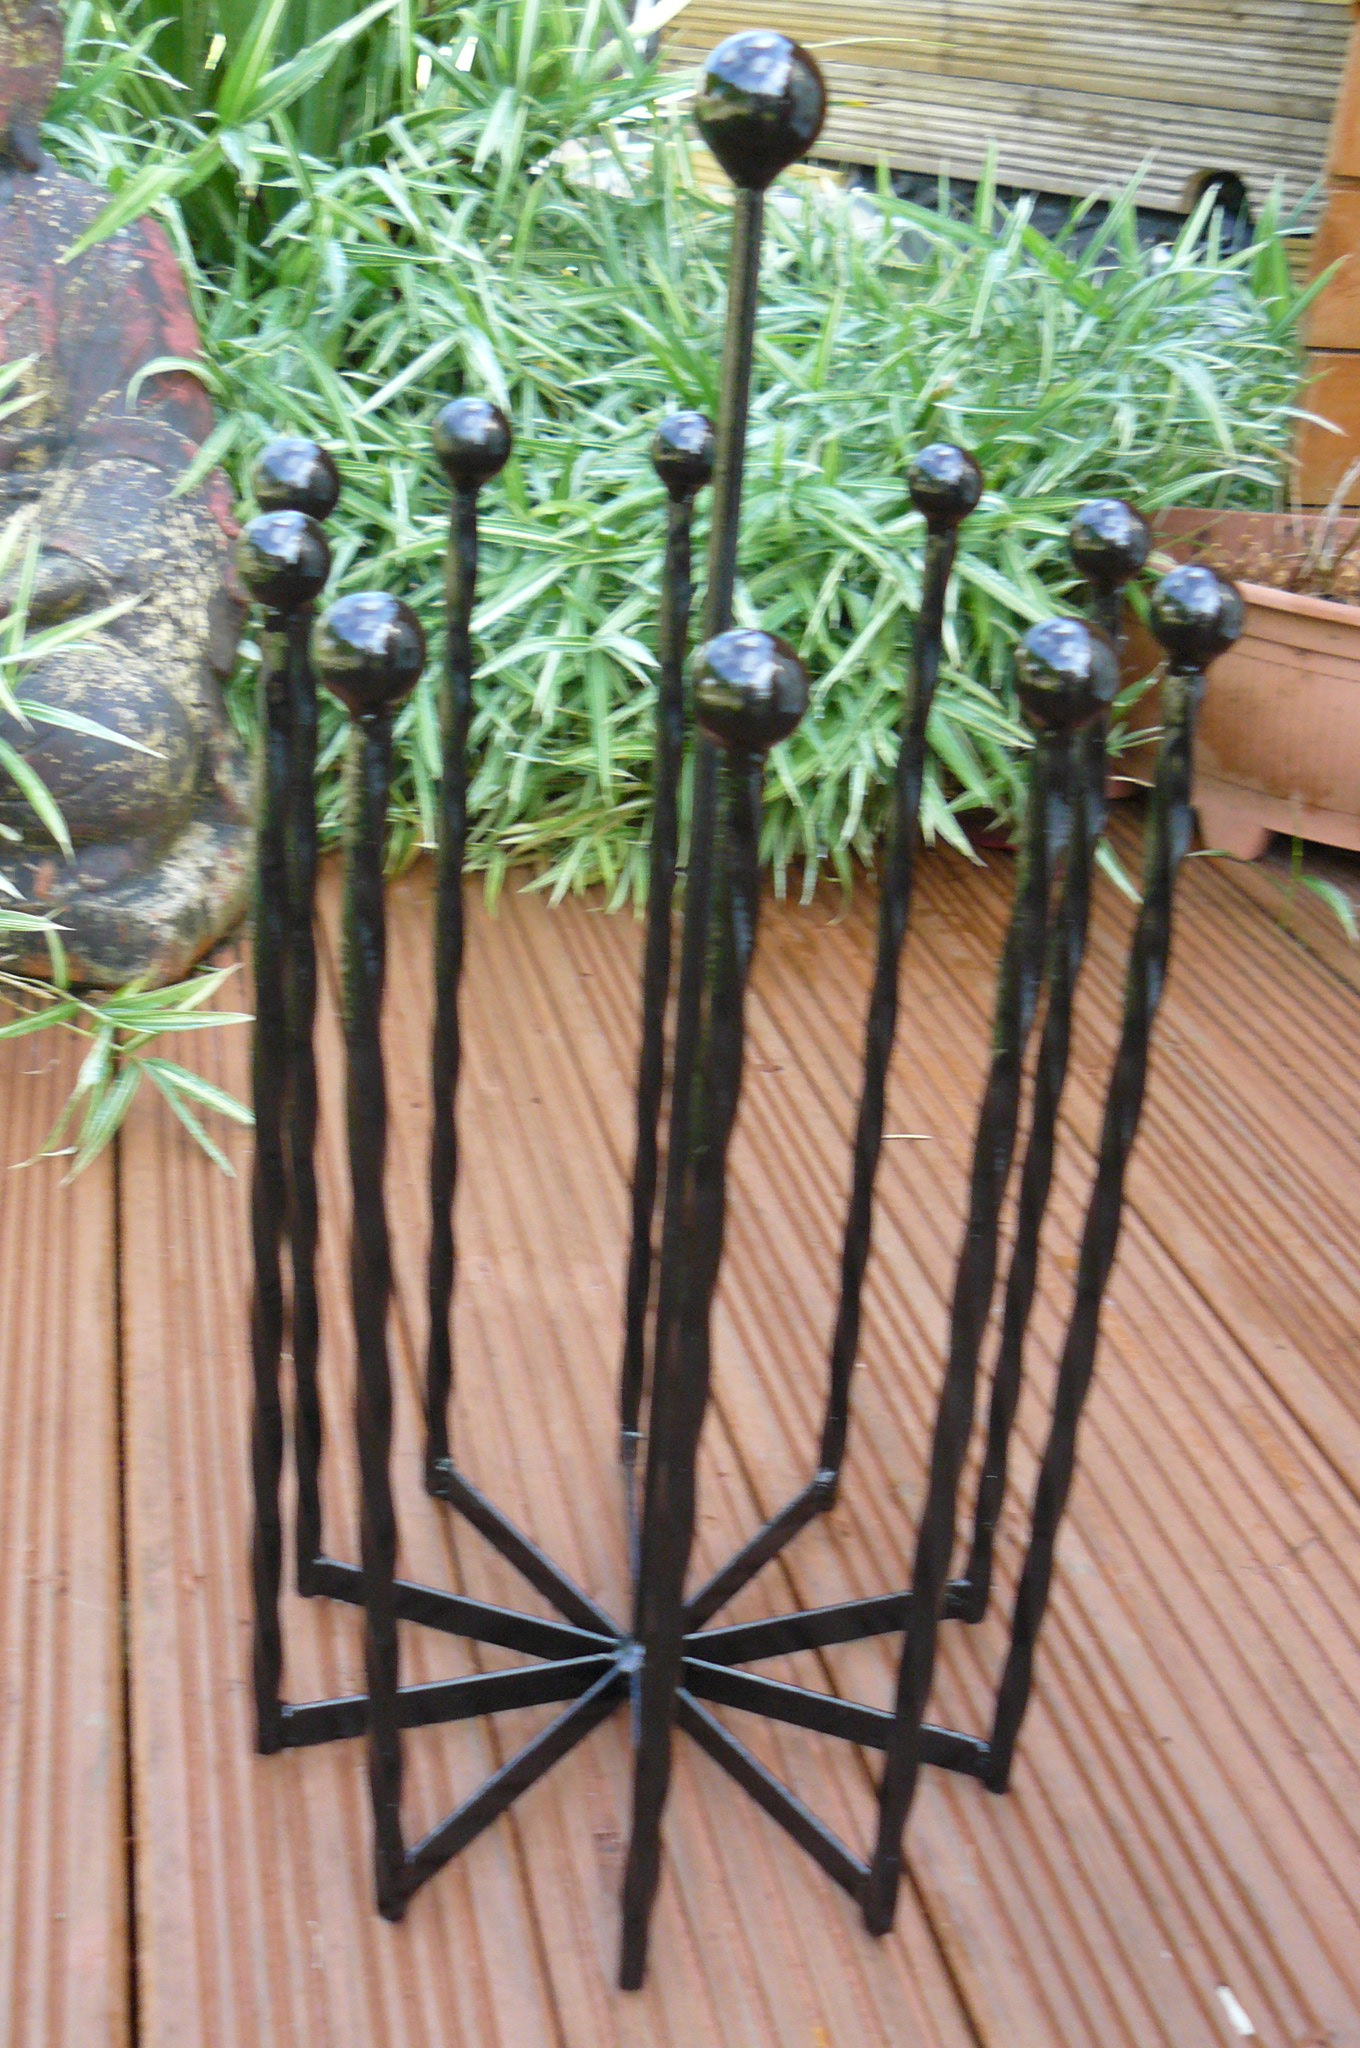 5 air carousel welly boot holder wimborne wrought iron works